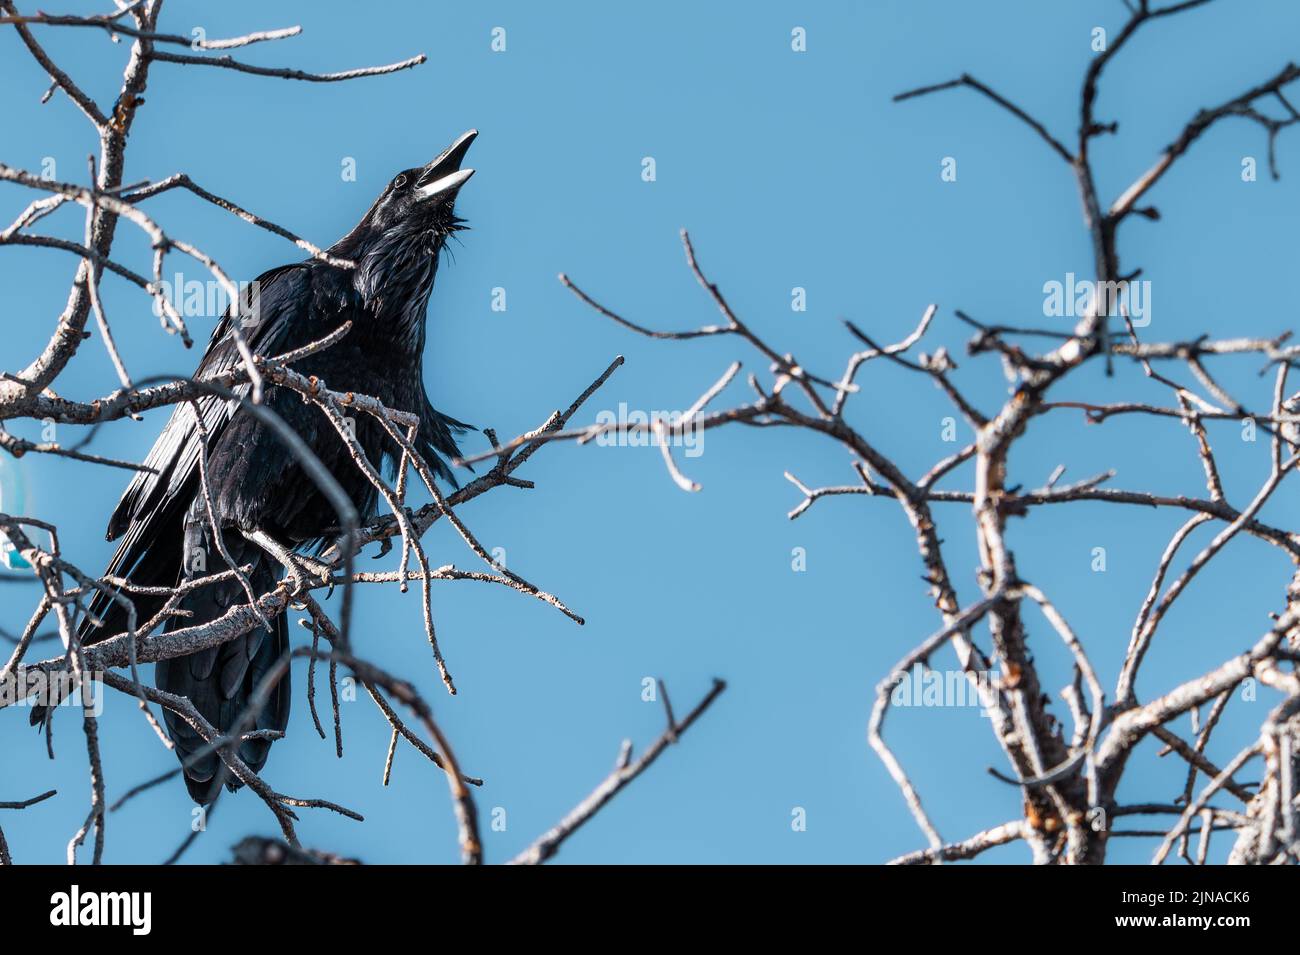 Black Raven bird crowing and sitting in tree against a blue sky Stock Photo